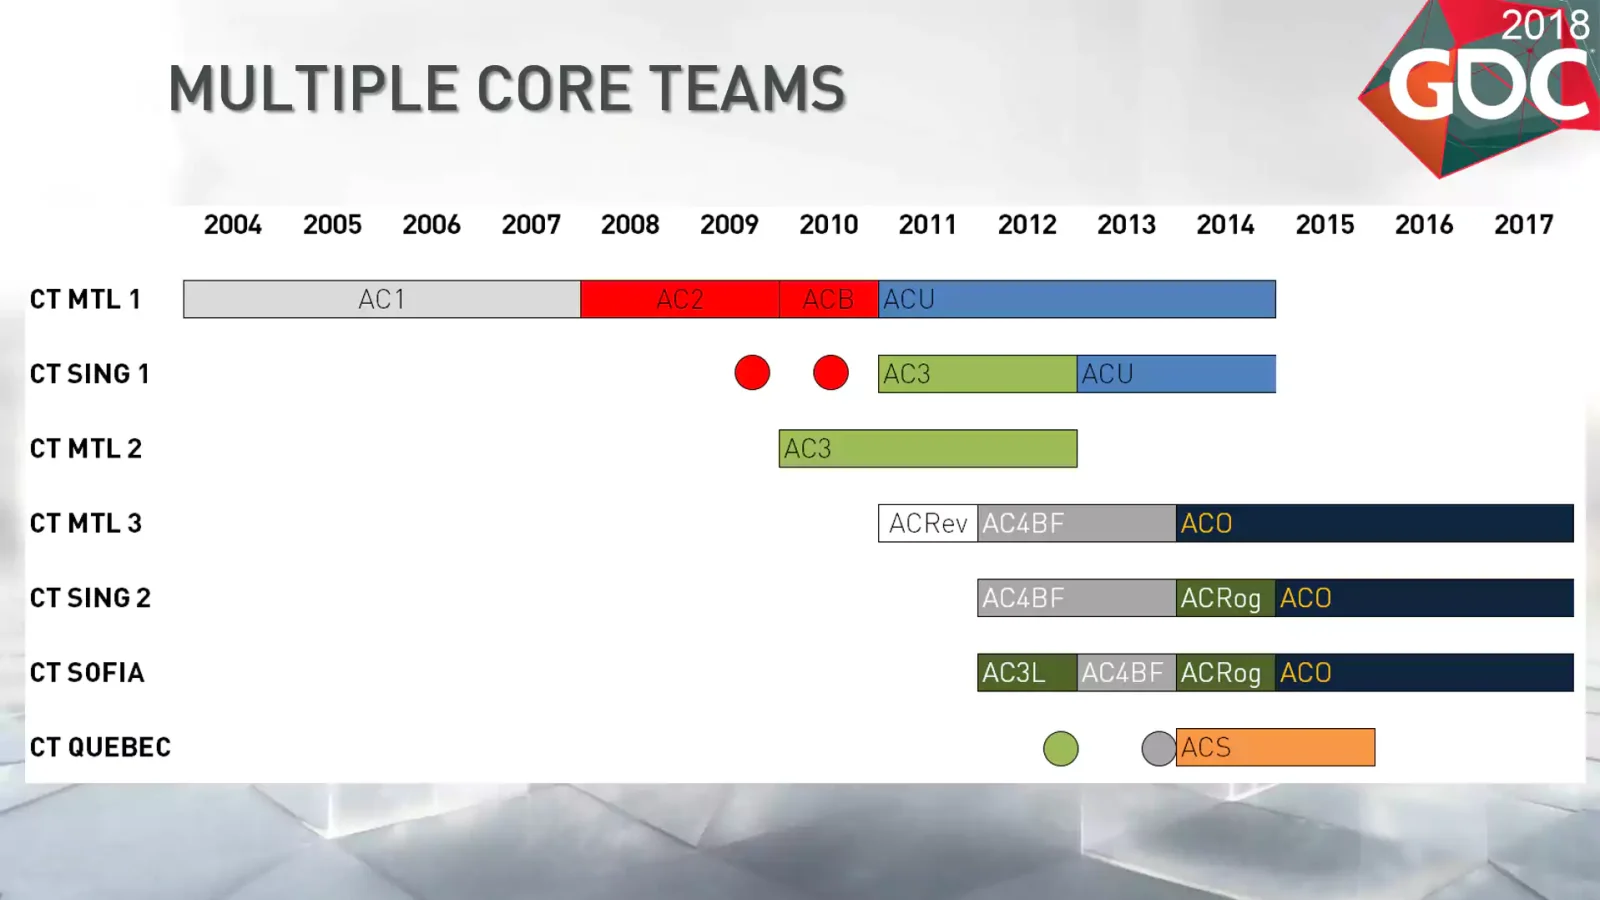 A timeline of Assassin's Creed teams, totaling at times six teams at once.